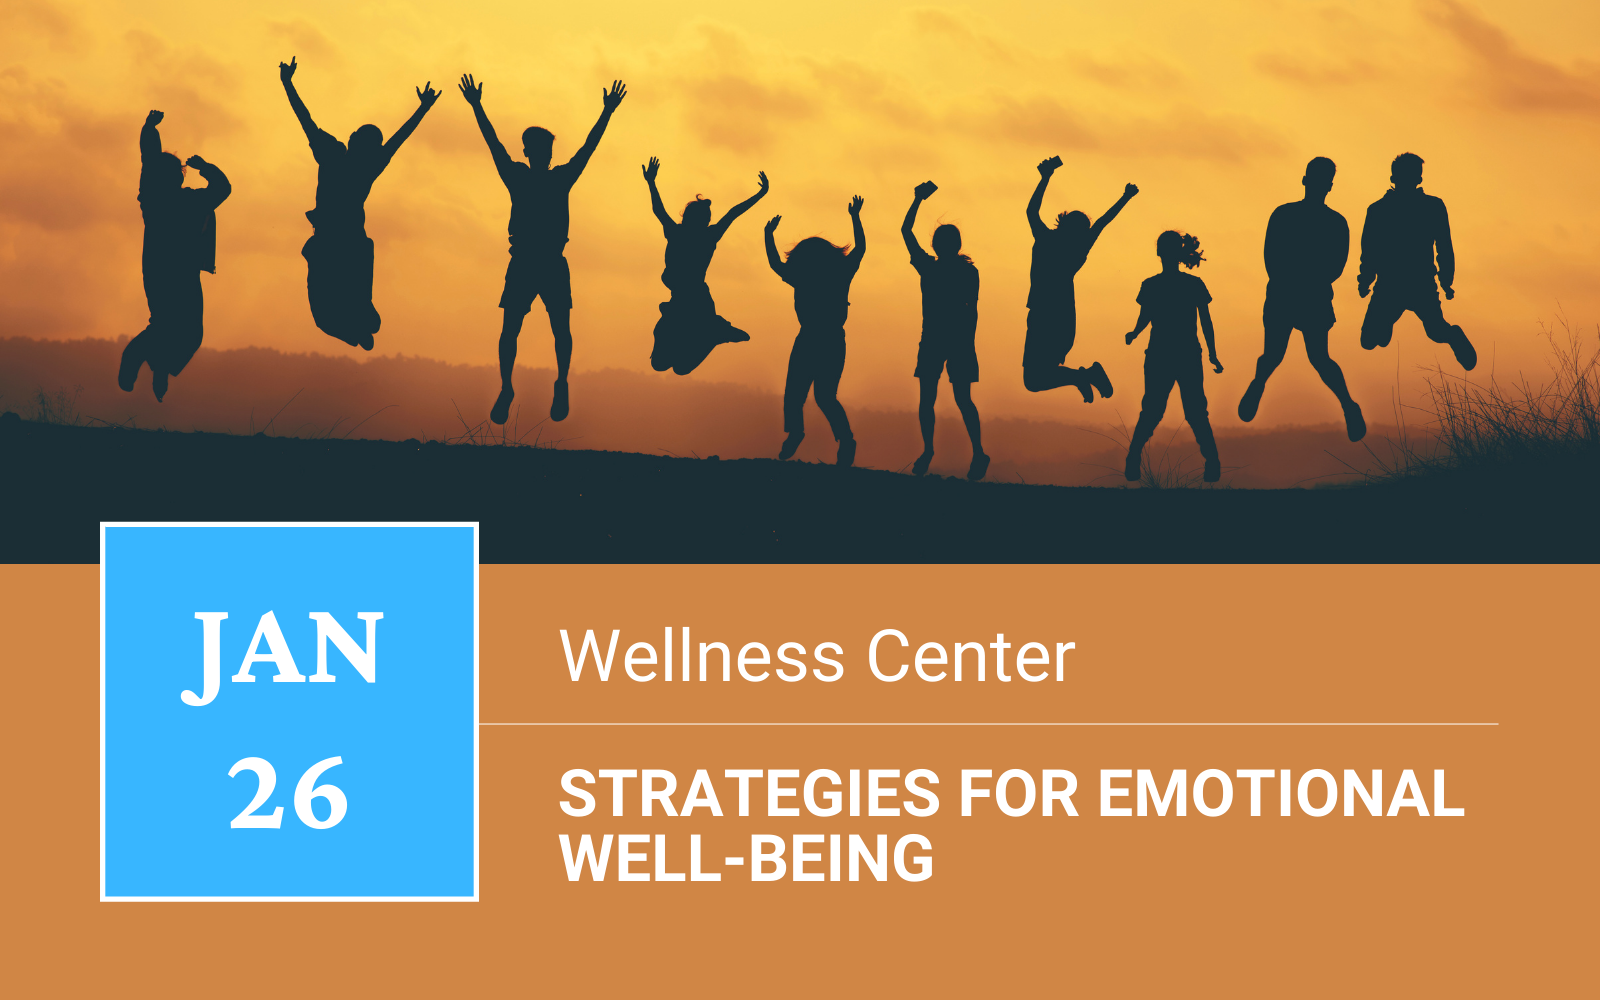 Discussion: Strategies for Emotional Well-Being